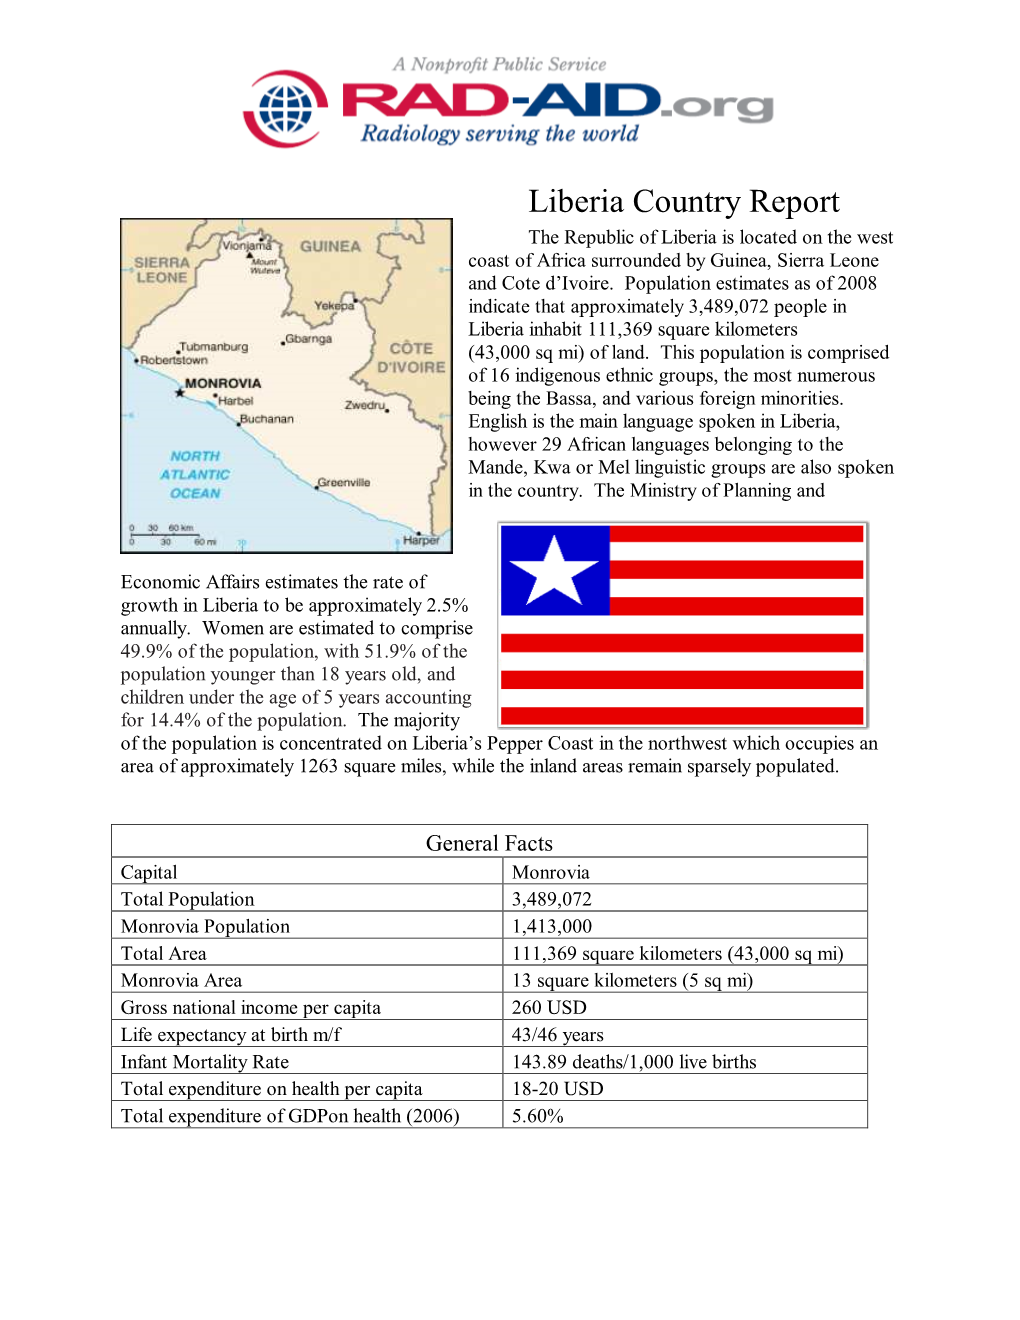 Liberia Country Report the Republic of Liberia Is Located on the West Coast of Africa Surrounded by Guinea, Sierra Leone and Cote D’Ivoire